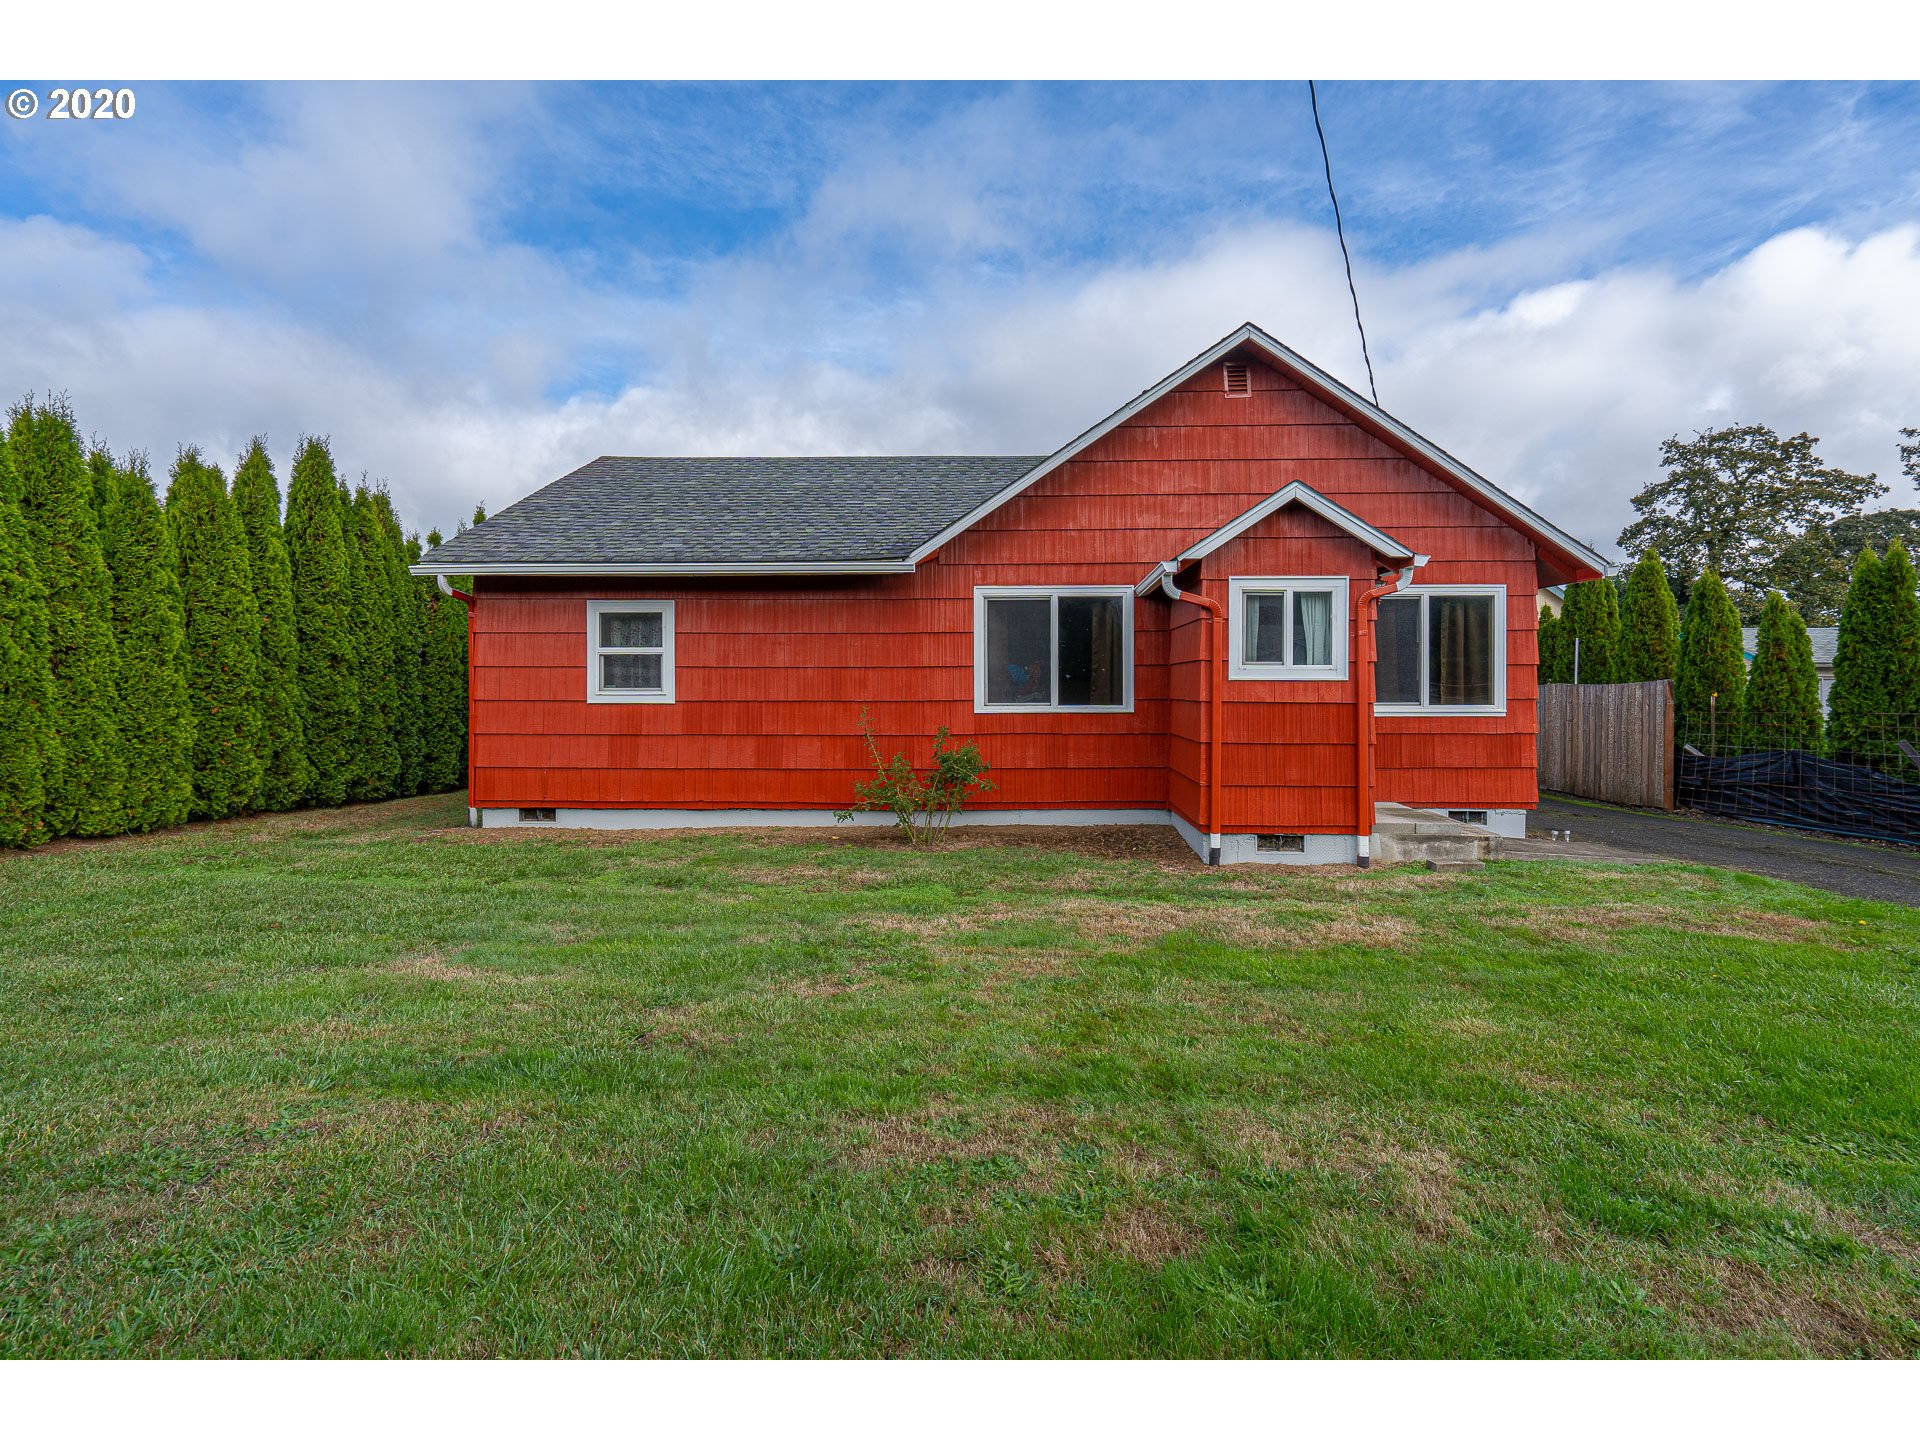 30475 SALMON RIVER HWY (1 of 26)